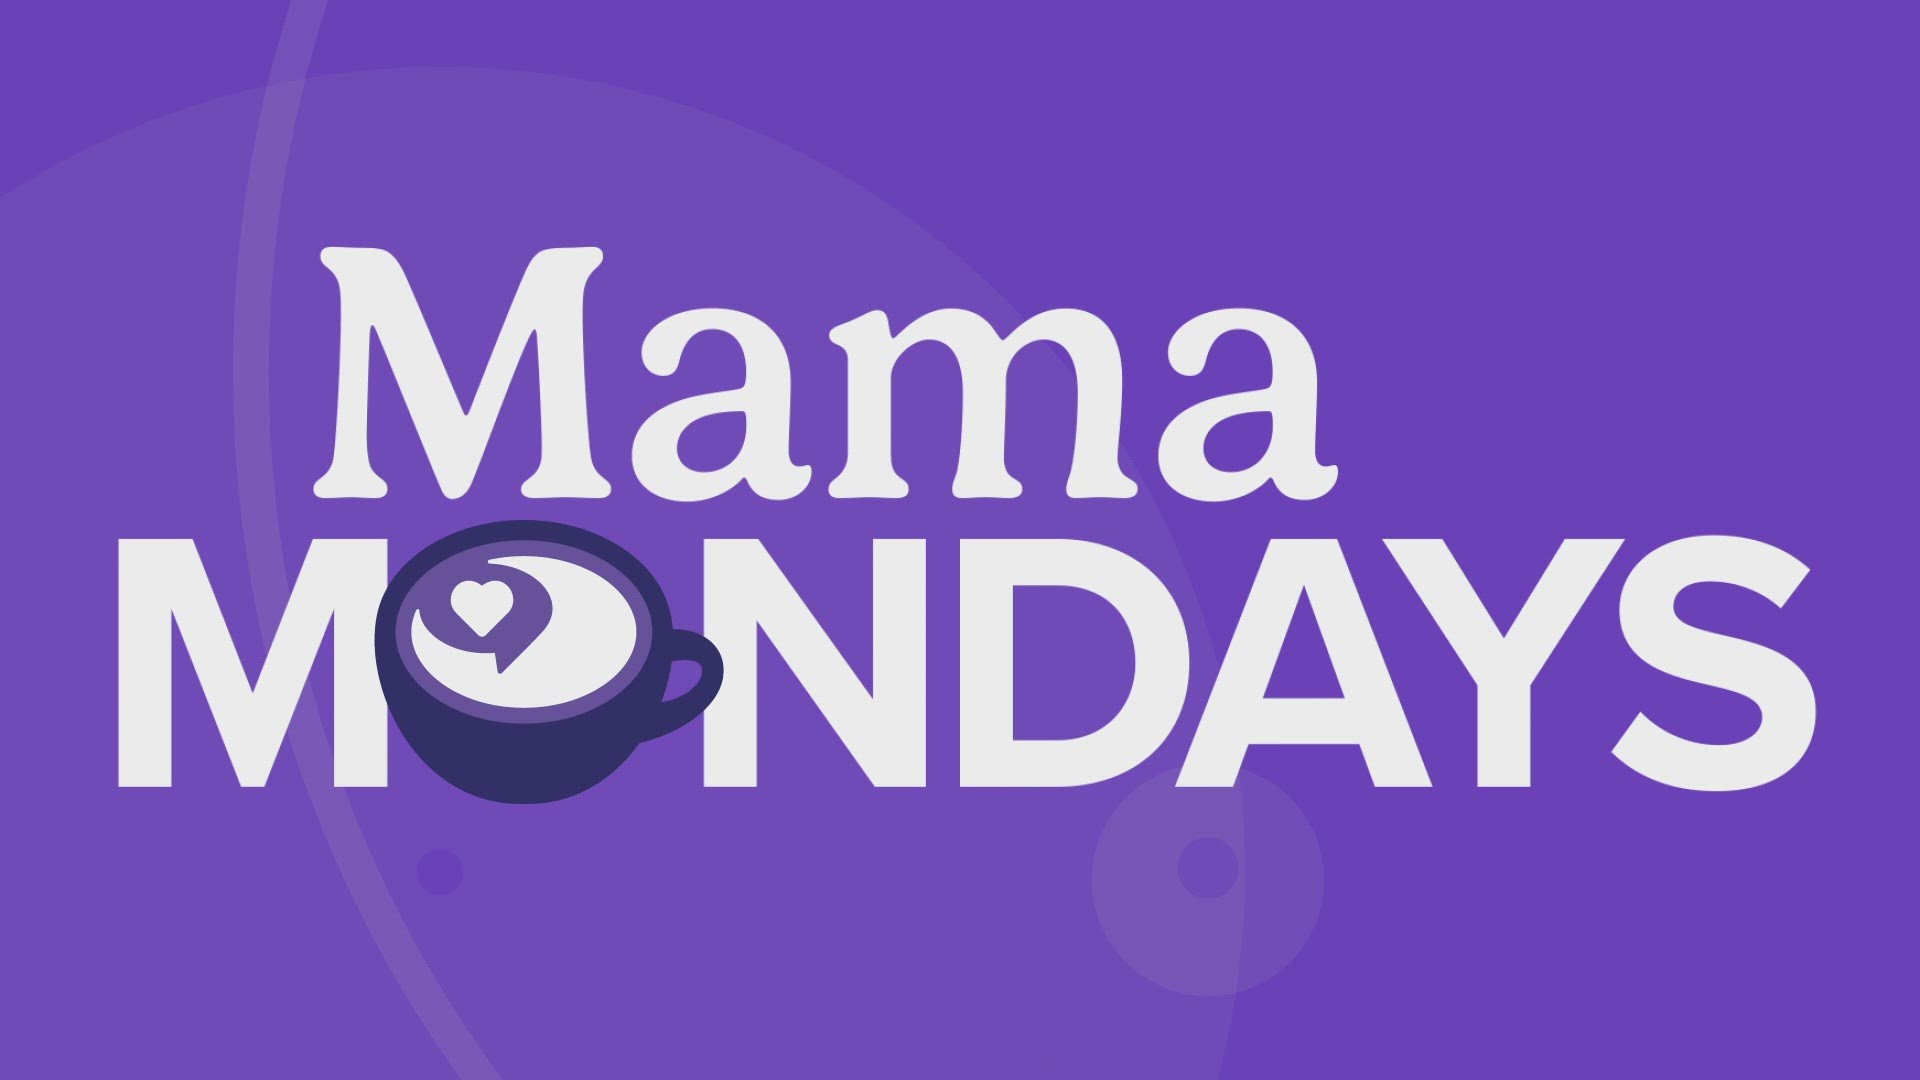 Got a question or topic for the Mamas? Send it to MyCOCO@9News.com to connect.